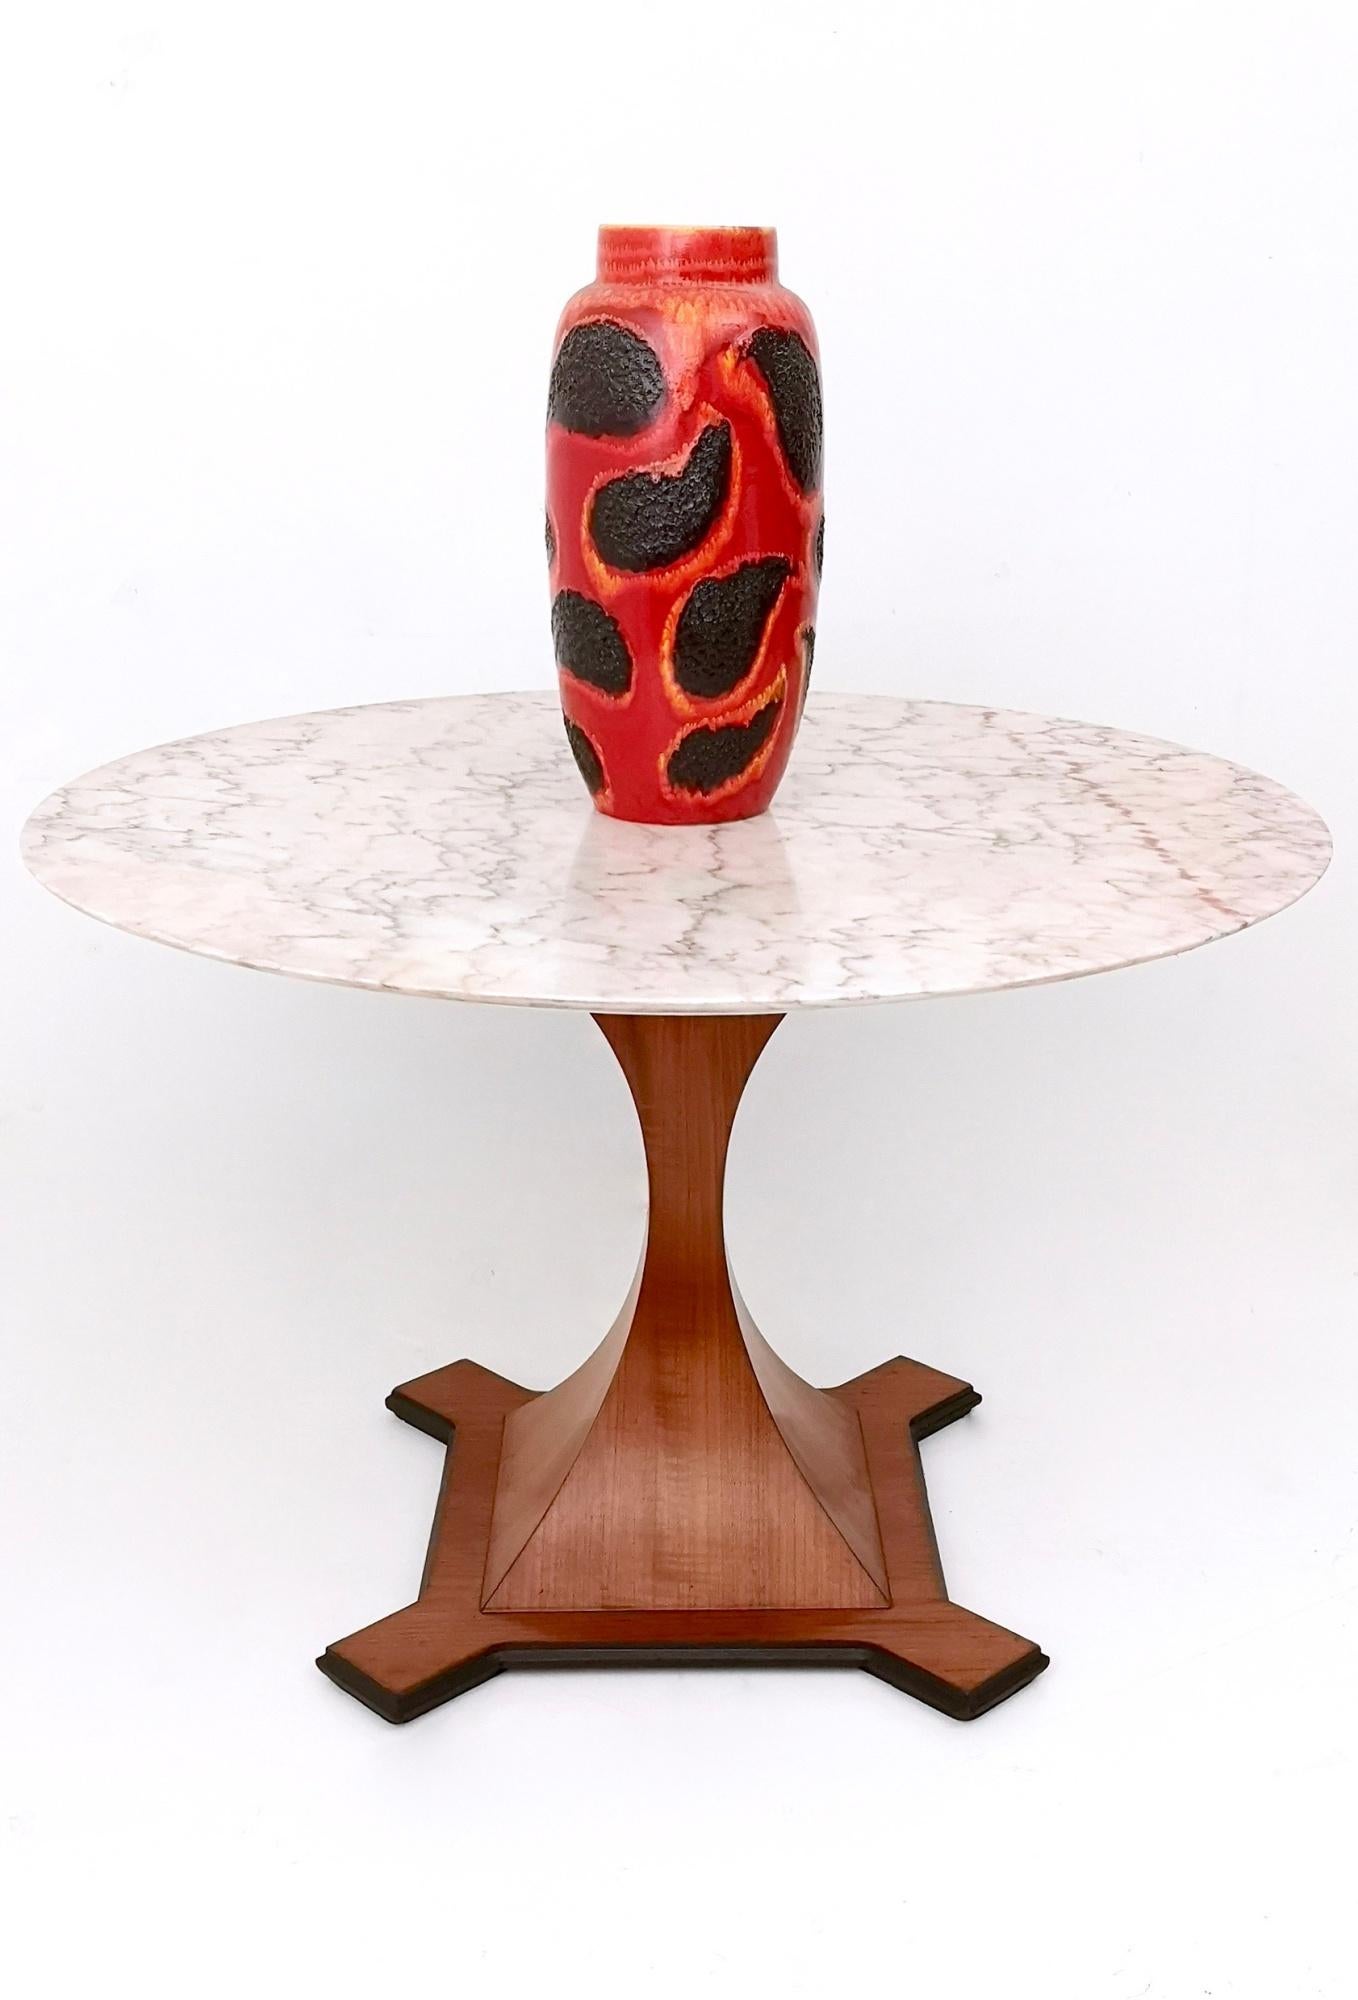 Round Dining Table with a Veined Portuguese Pink Marble-Top, Italy, 1950s (Italienisch)